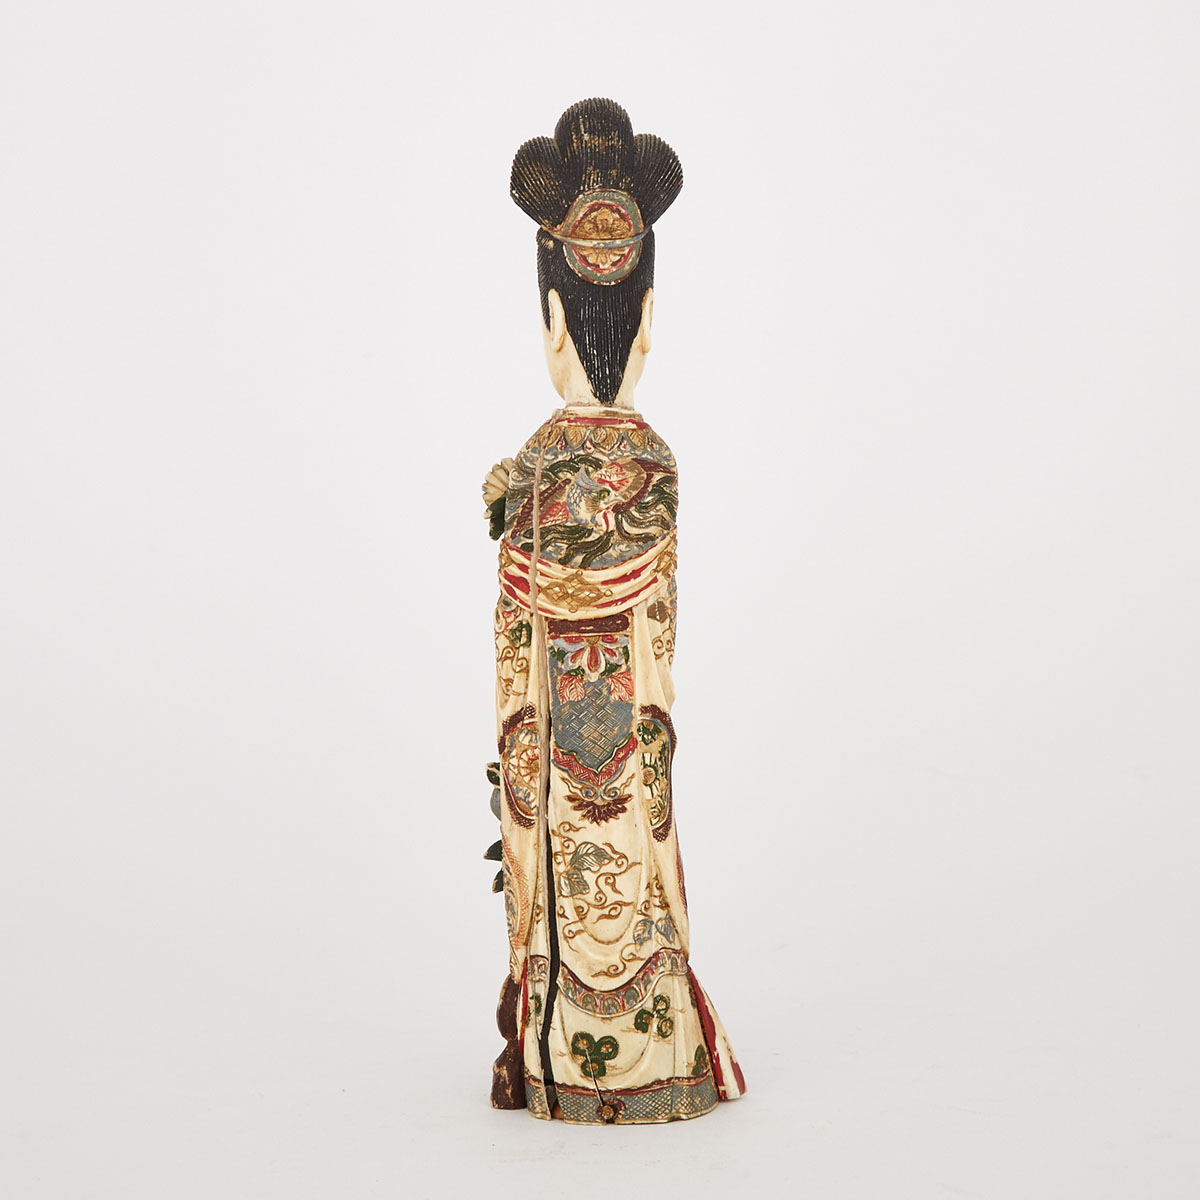 A Polychrome Ivory Carved Lady, Late 19th/Early 20th Century